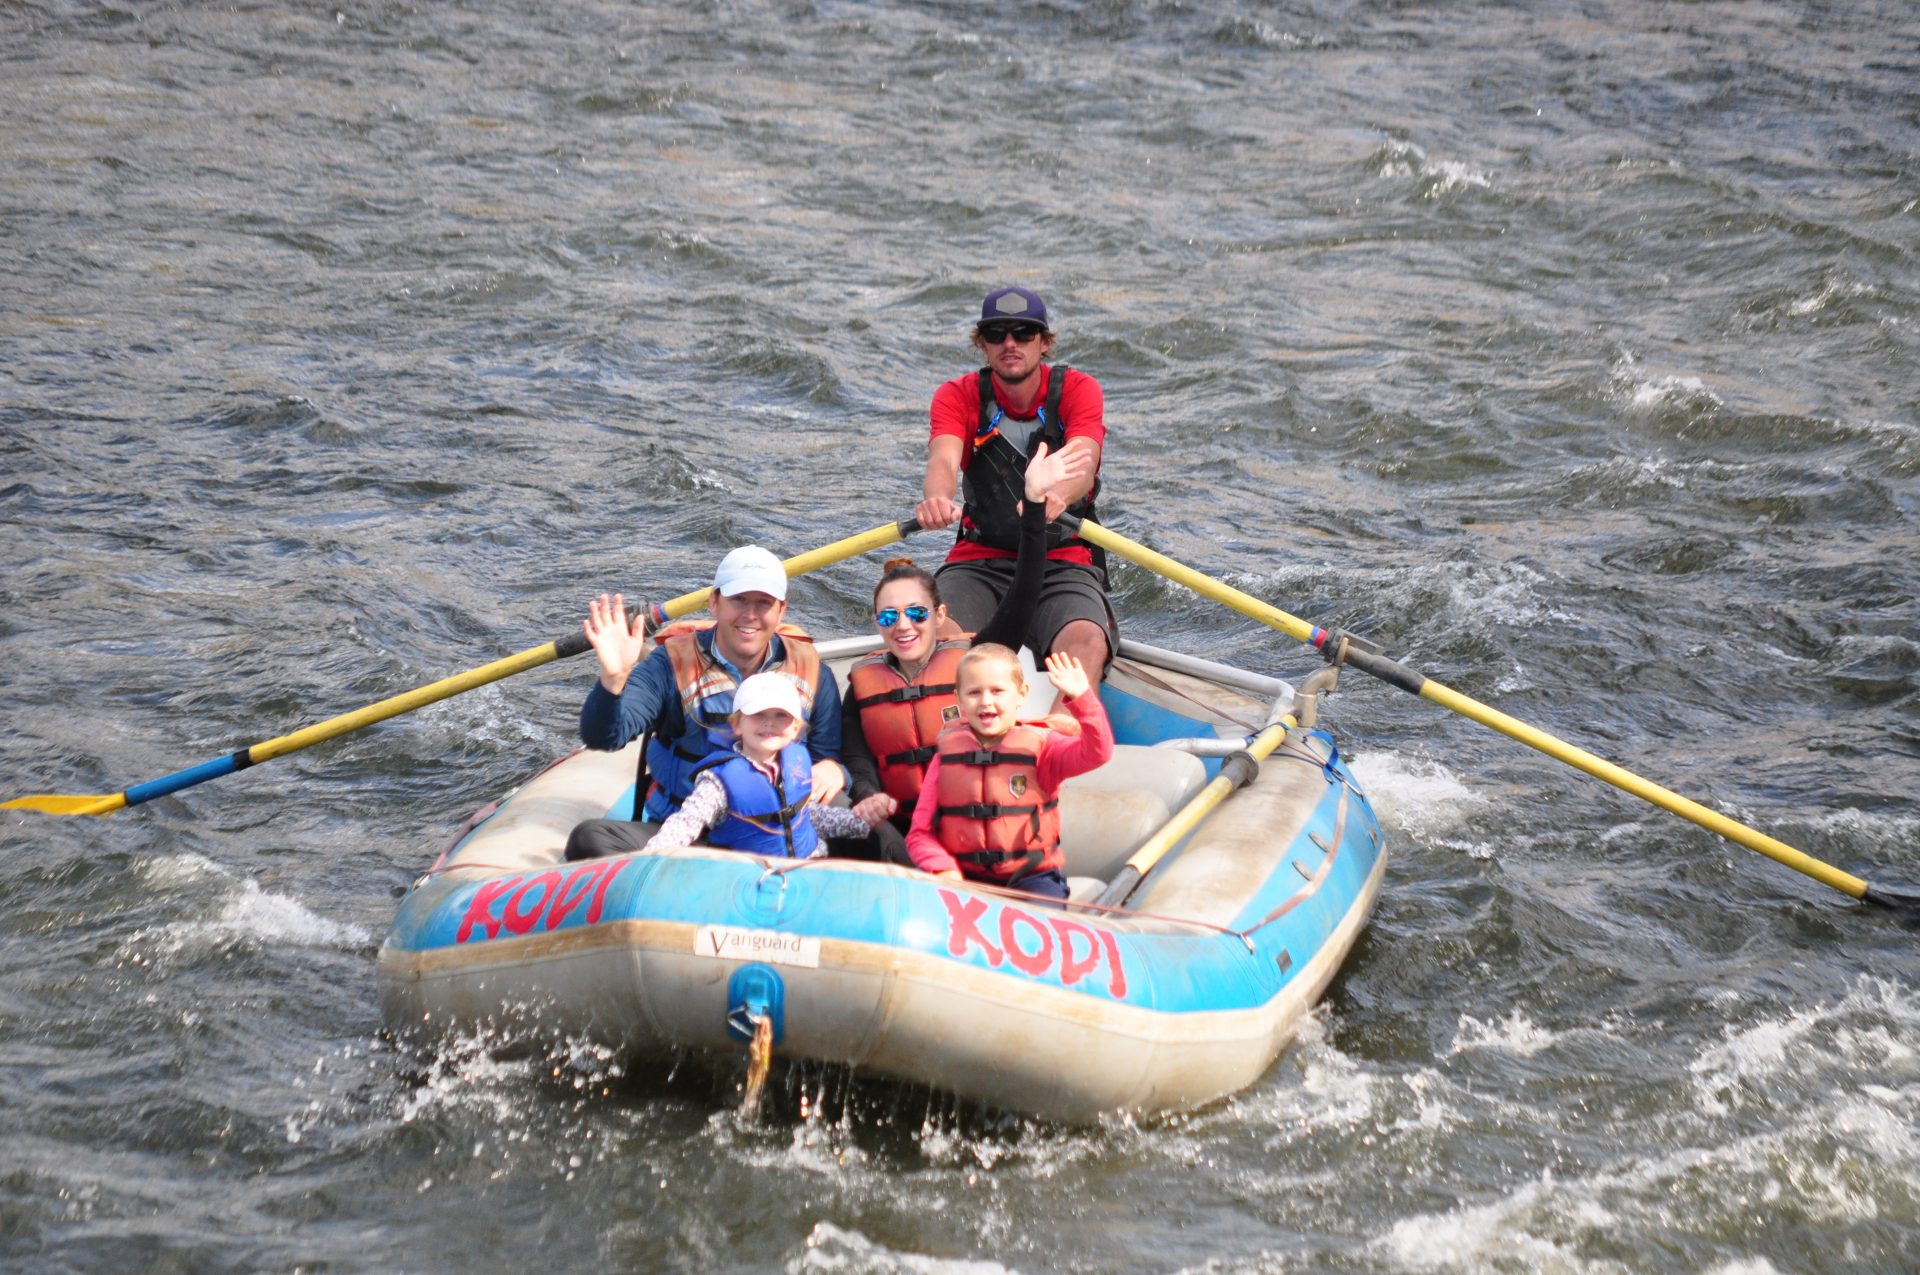 Many people come from a long distance to experinece rafting in Colorado and create lifelong memories